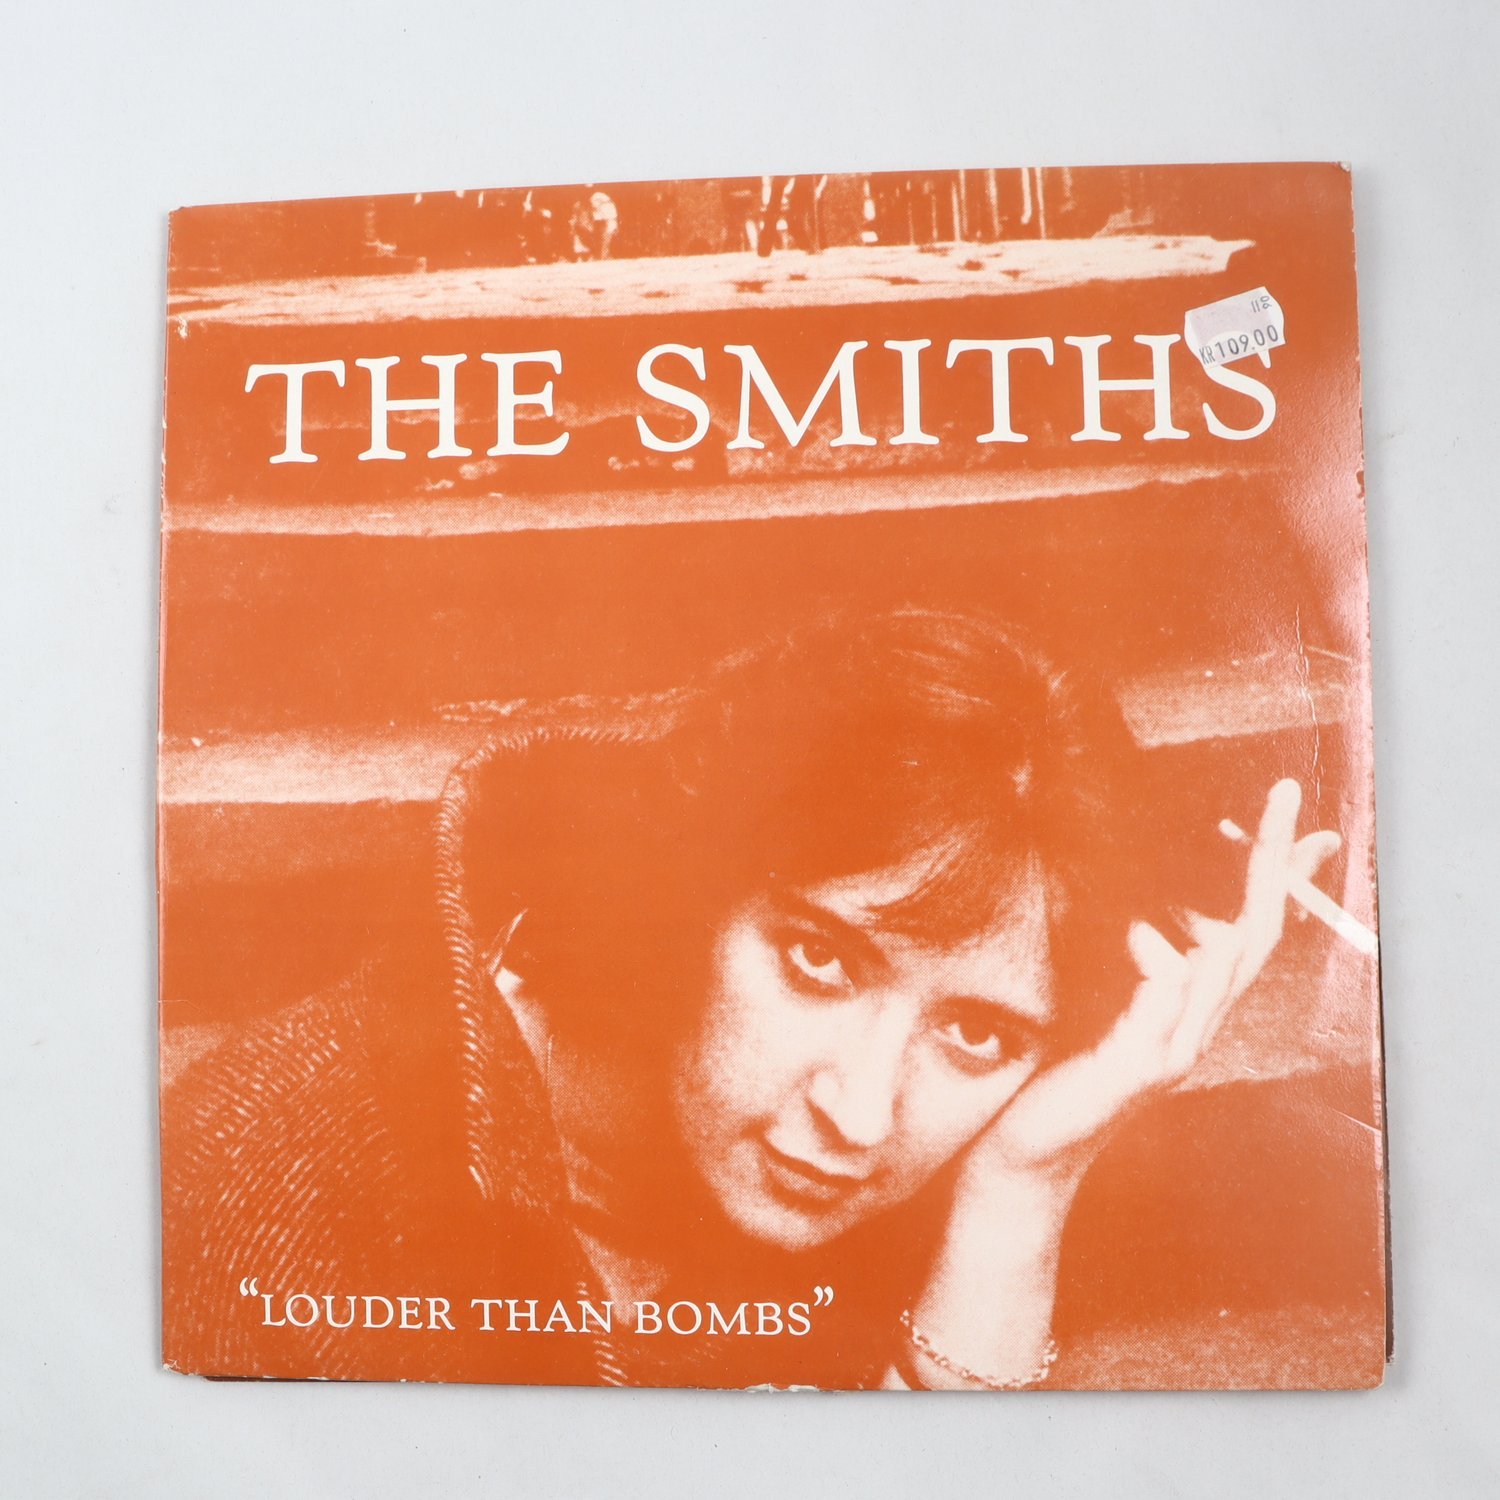 LP The Smiths, Louder Than Bombs